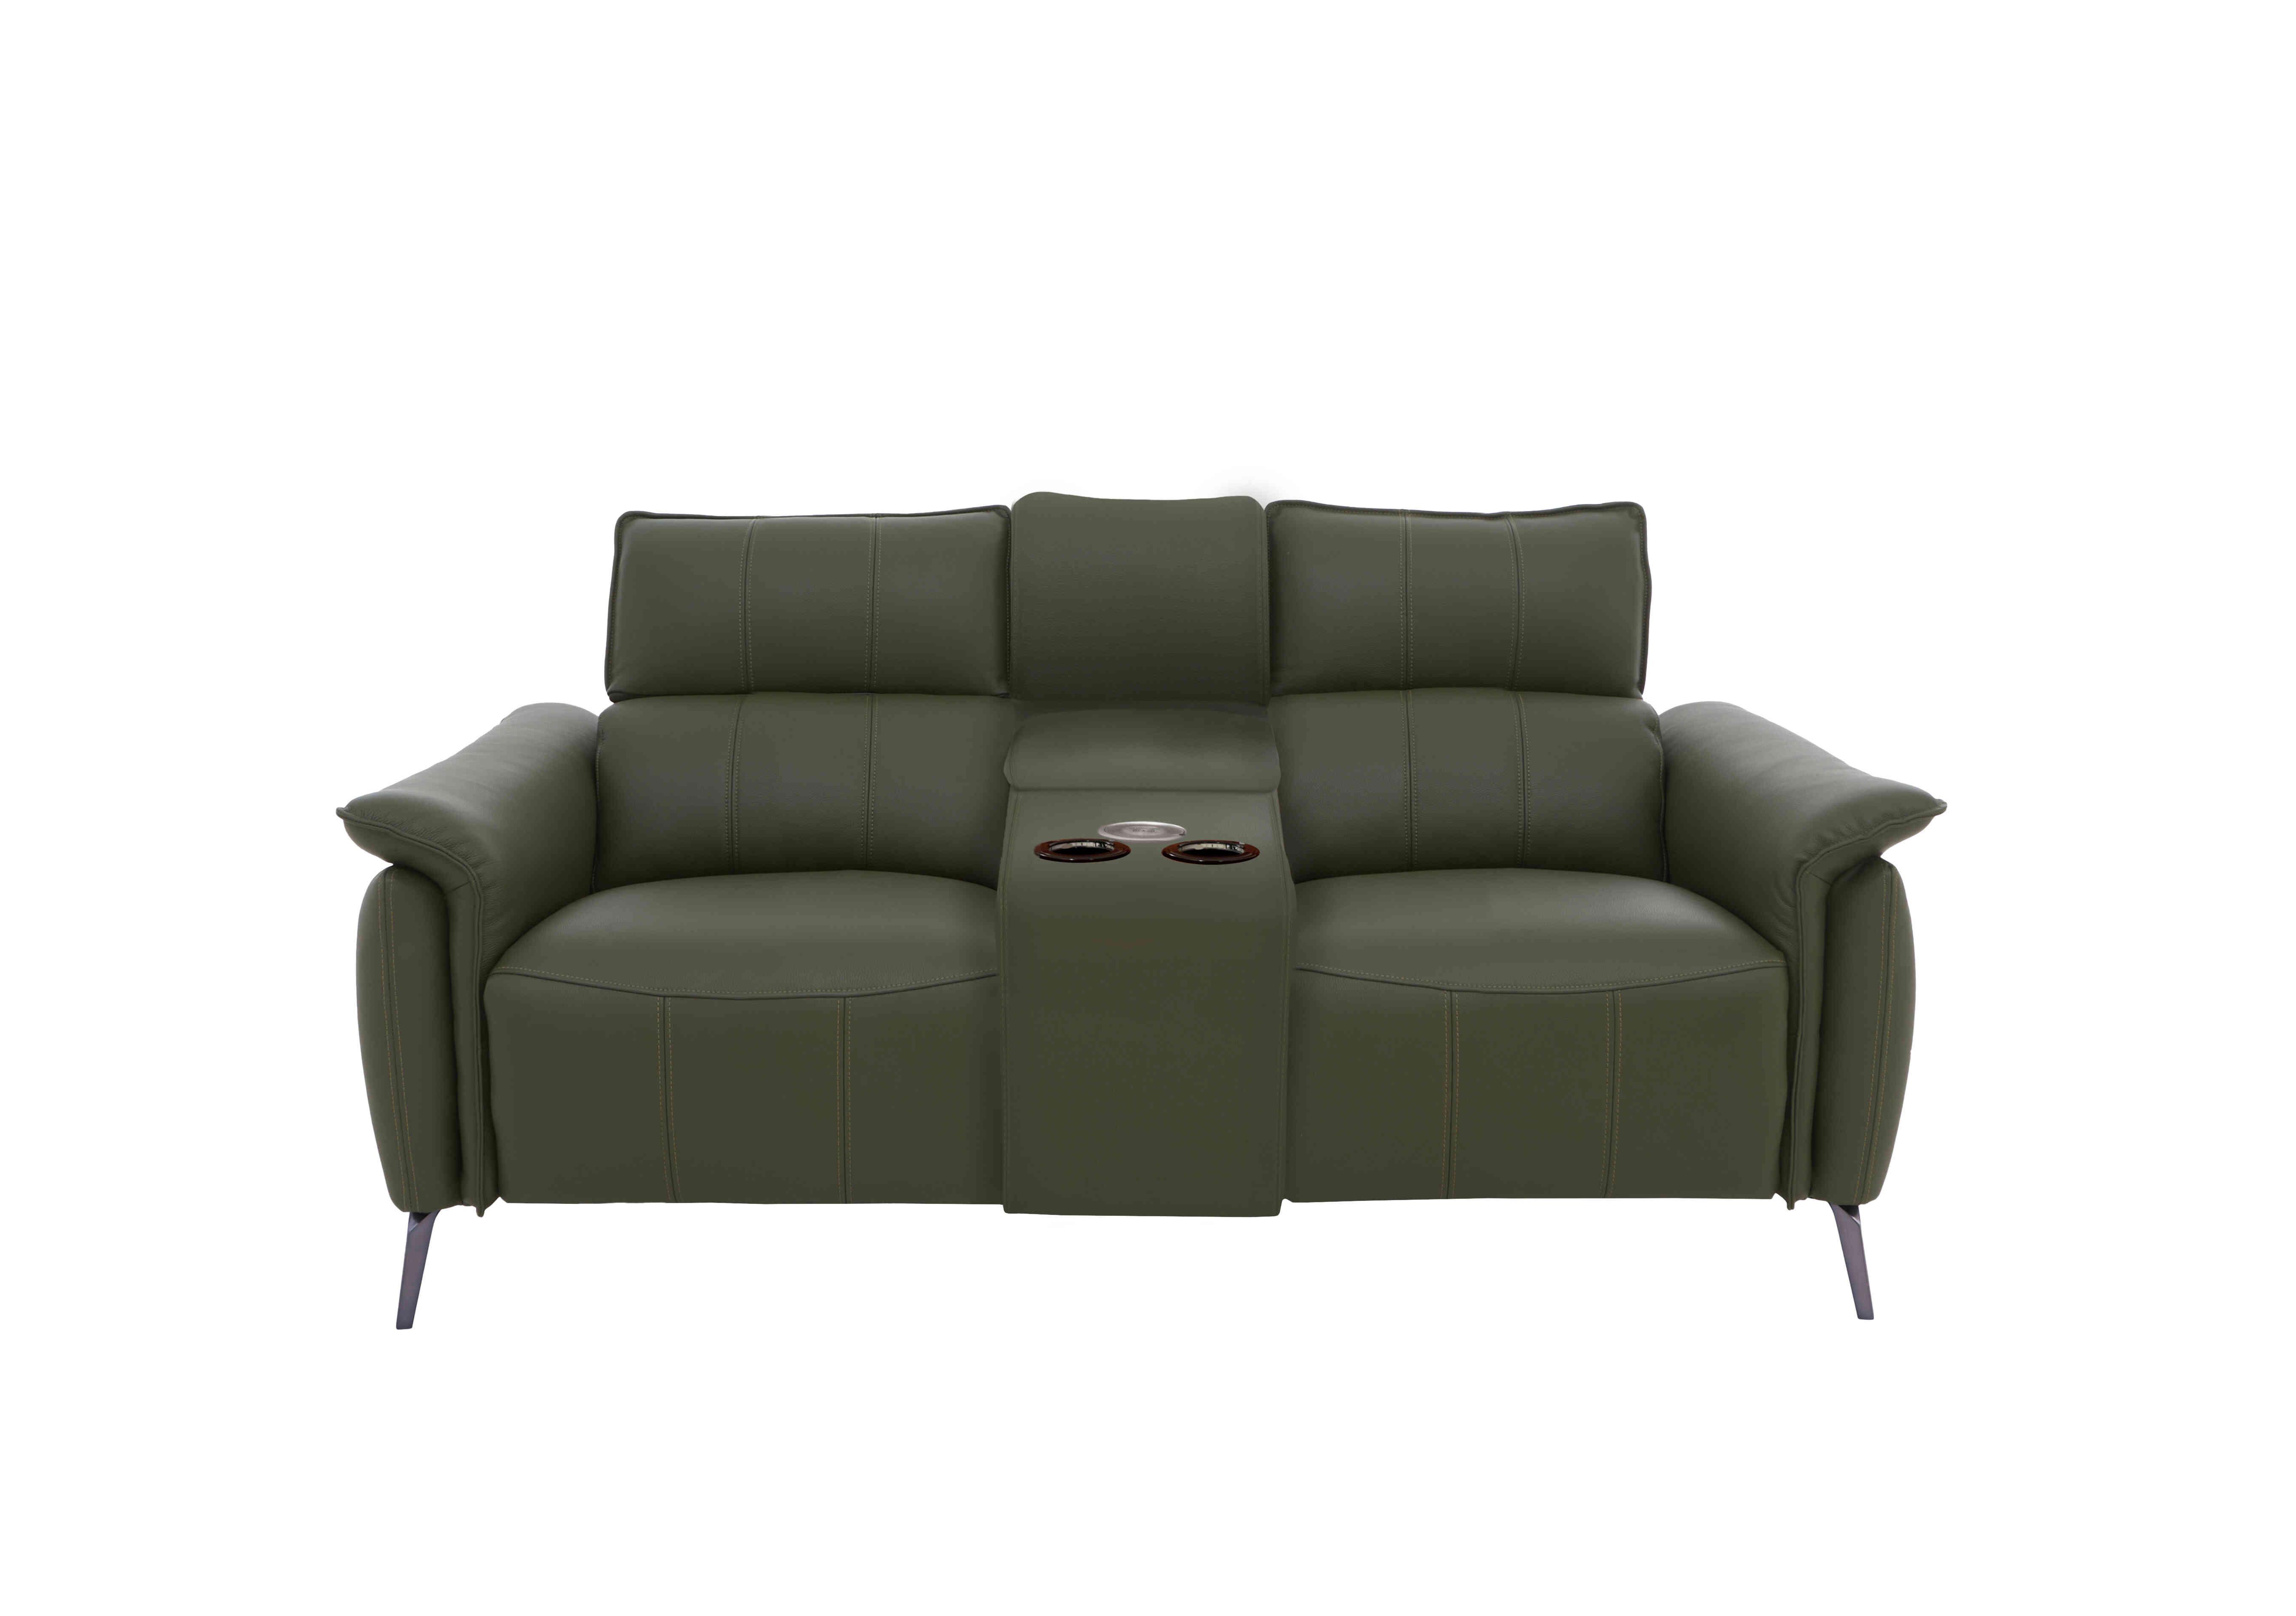 Jude 2 Seater Leather Power Recliner Sofa with Smart Console Unit and Power Telescopic Headrests in Montana Oslo Pine Cat-40/10 on Furniture Village